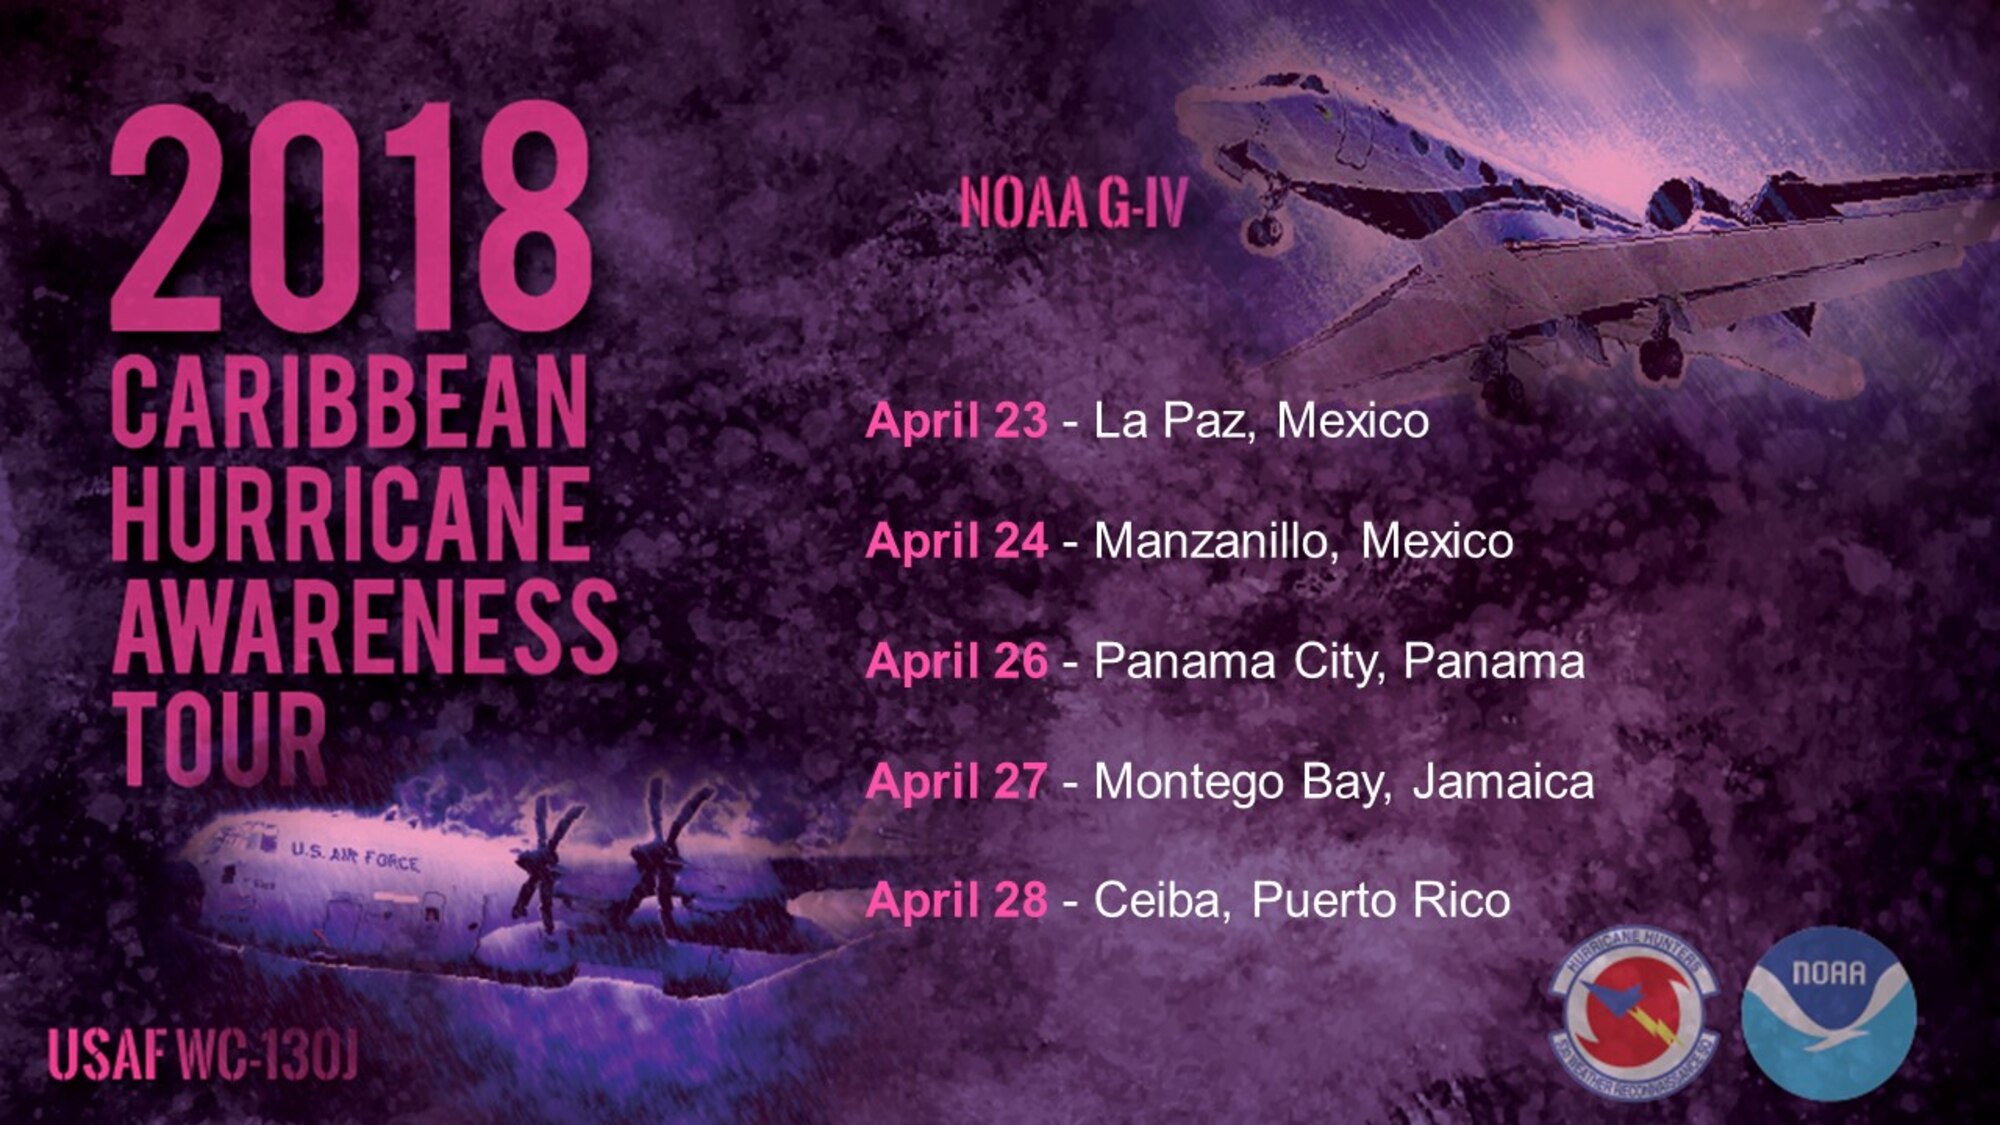 NOAA and the U.S. Air Force Reserve will host a series of events, including tours aboard a hurricane hunter aircraft, to help communities in Mexico and the Caribbean prepare for the season and the coming storms as part of the Caribbean Hurricane Awareness Tour April 23-28. (Graphic by National Hurricane Center)